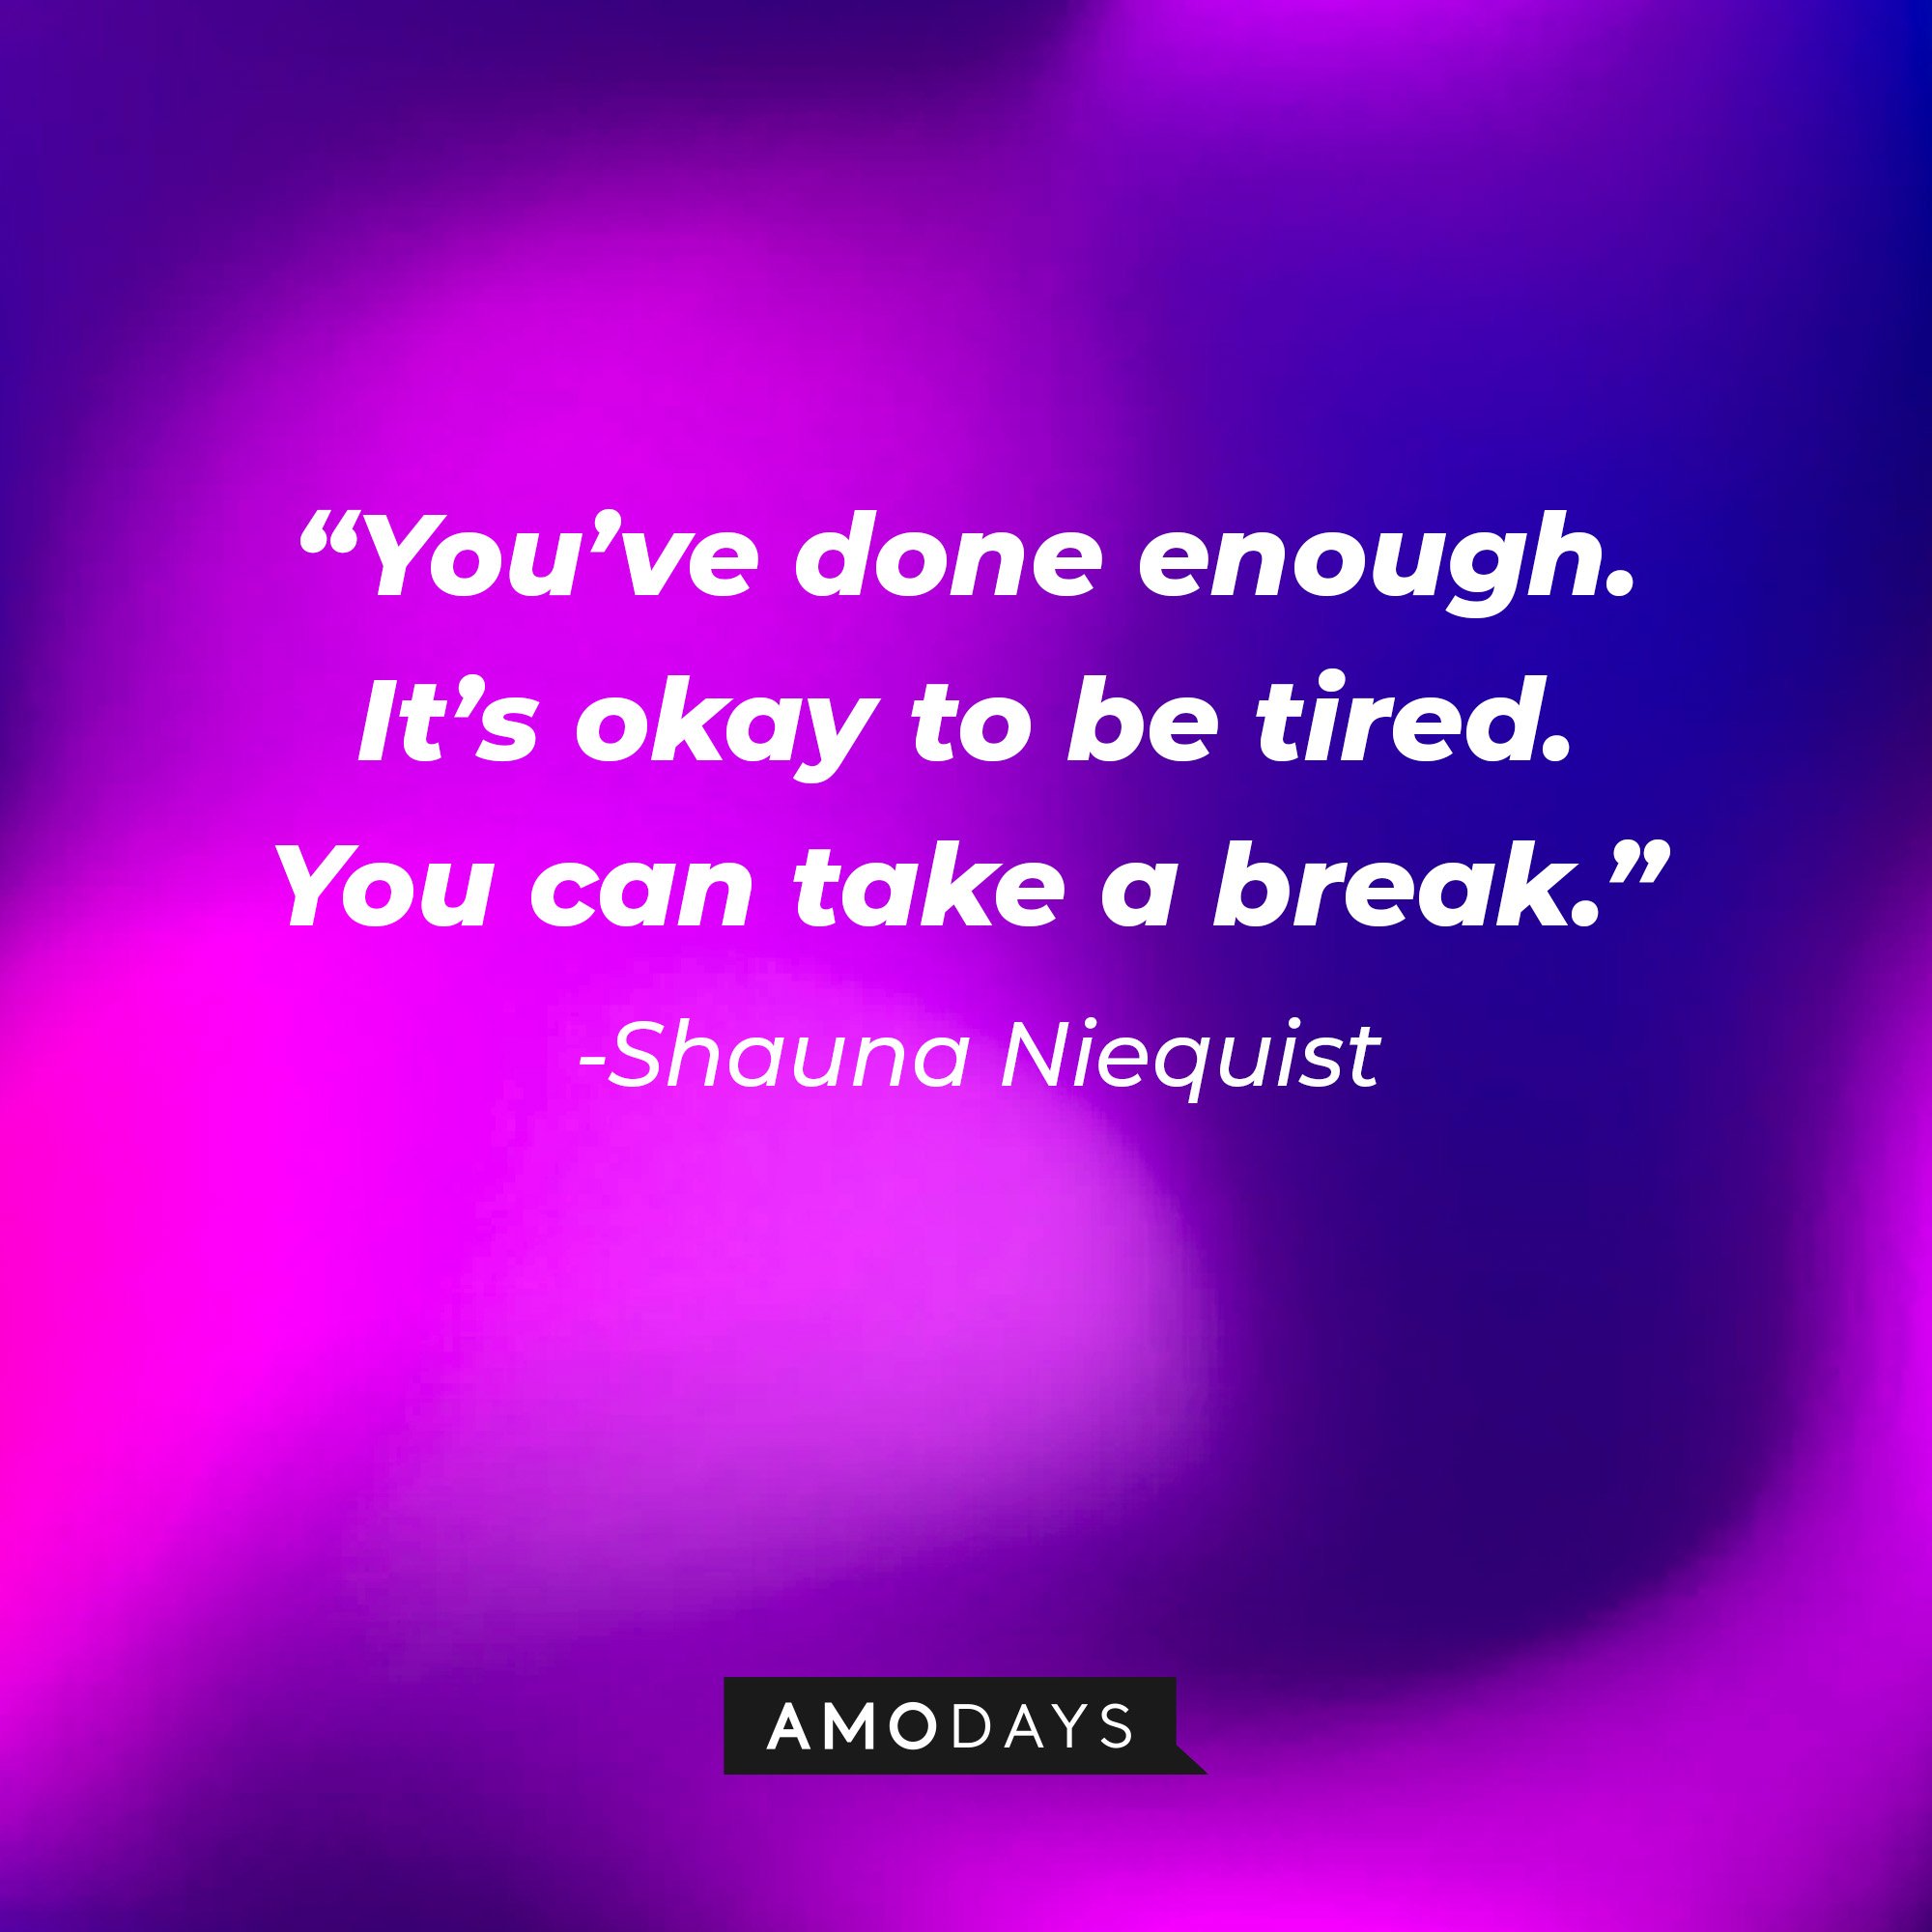 Shauna Niequist's quote: “You’ve done enough. It’s okay to be tired. You can take a break.” | Image: Shauna